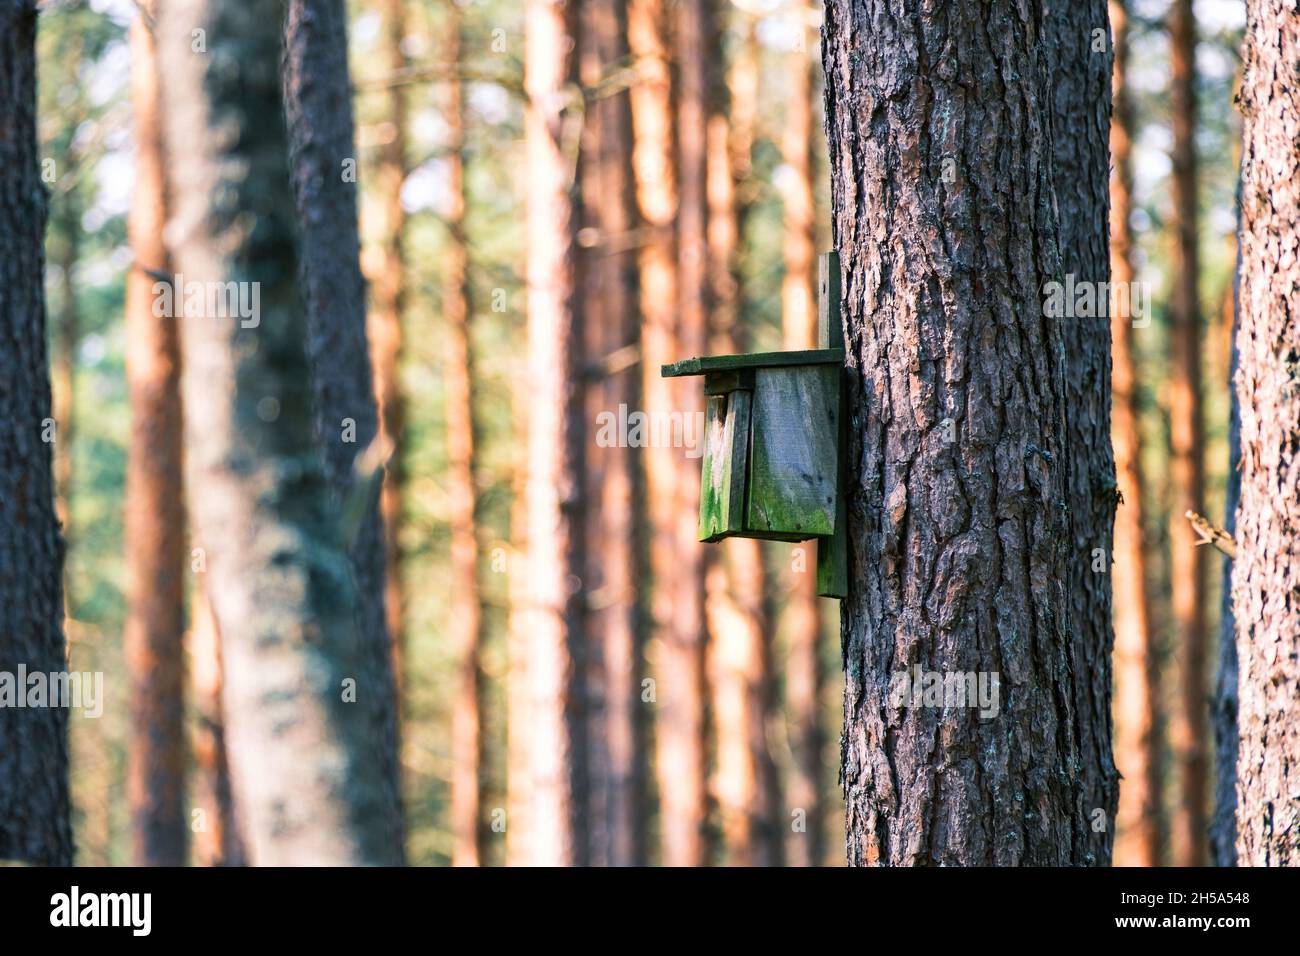 wooden birdhouse on a tree in the woods Stock Photo